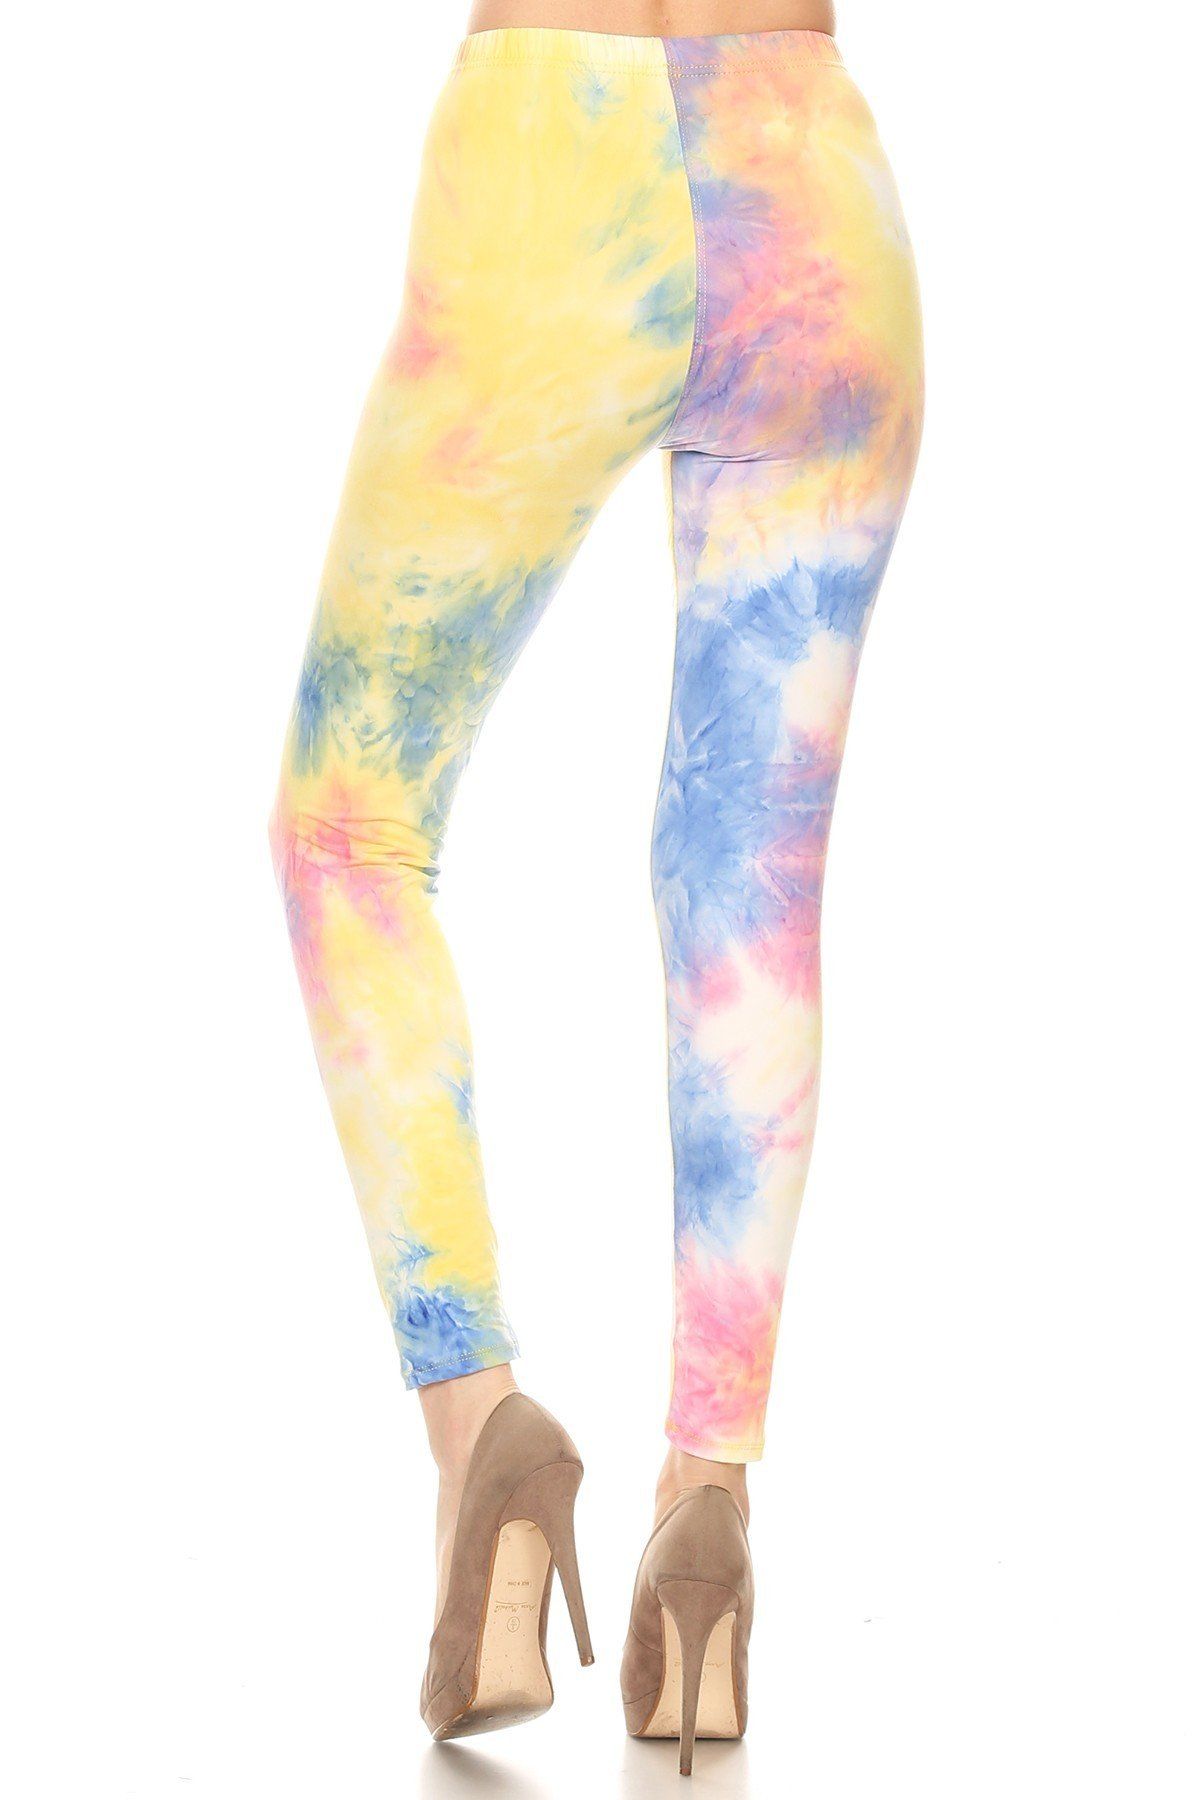 Tie Dye Printed, Full Length, High Waisted Leggings In A Fitted Style With An Elastic Waistband